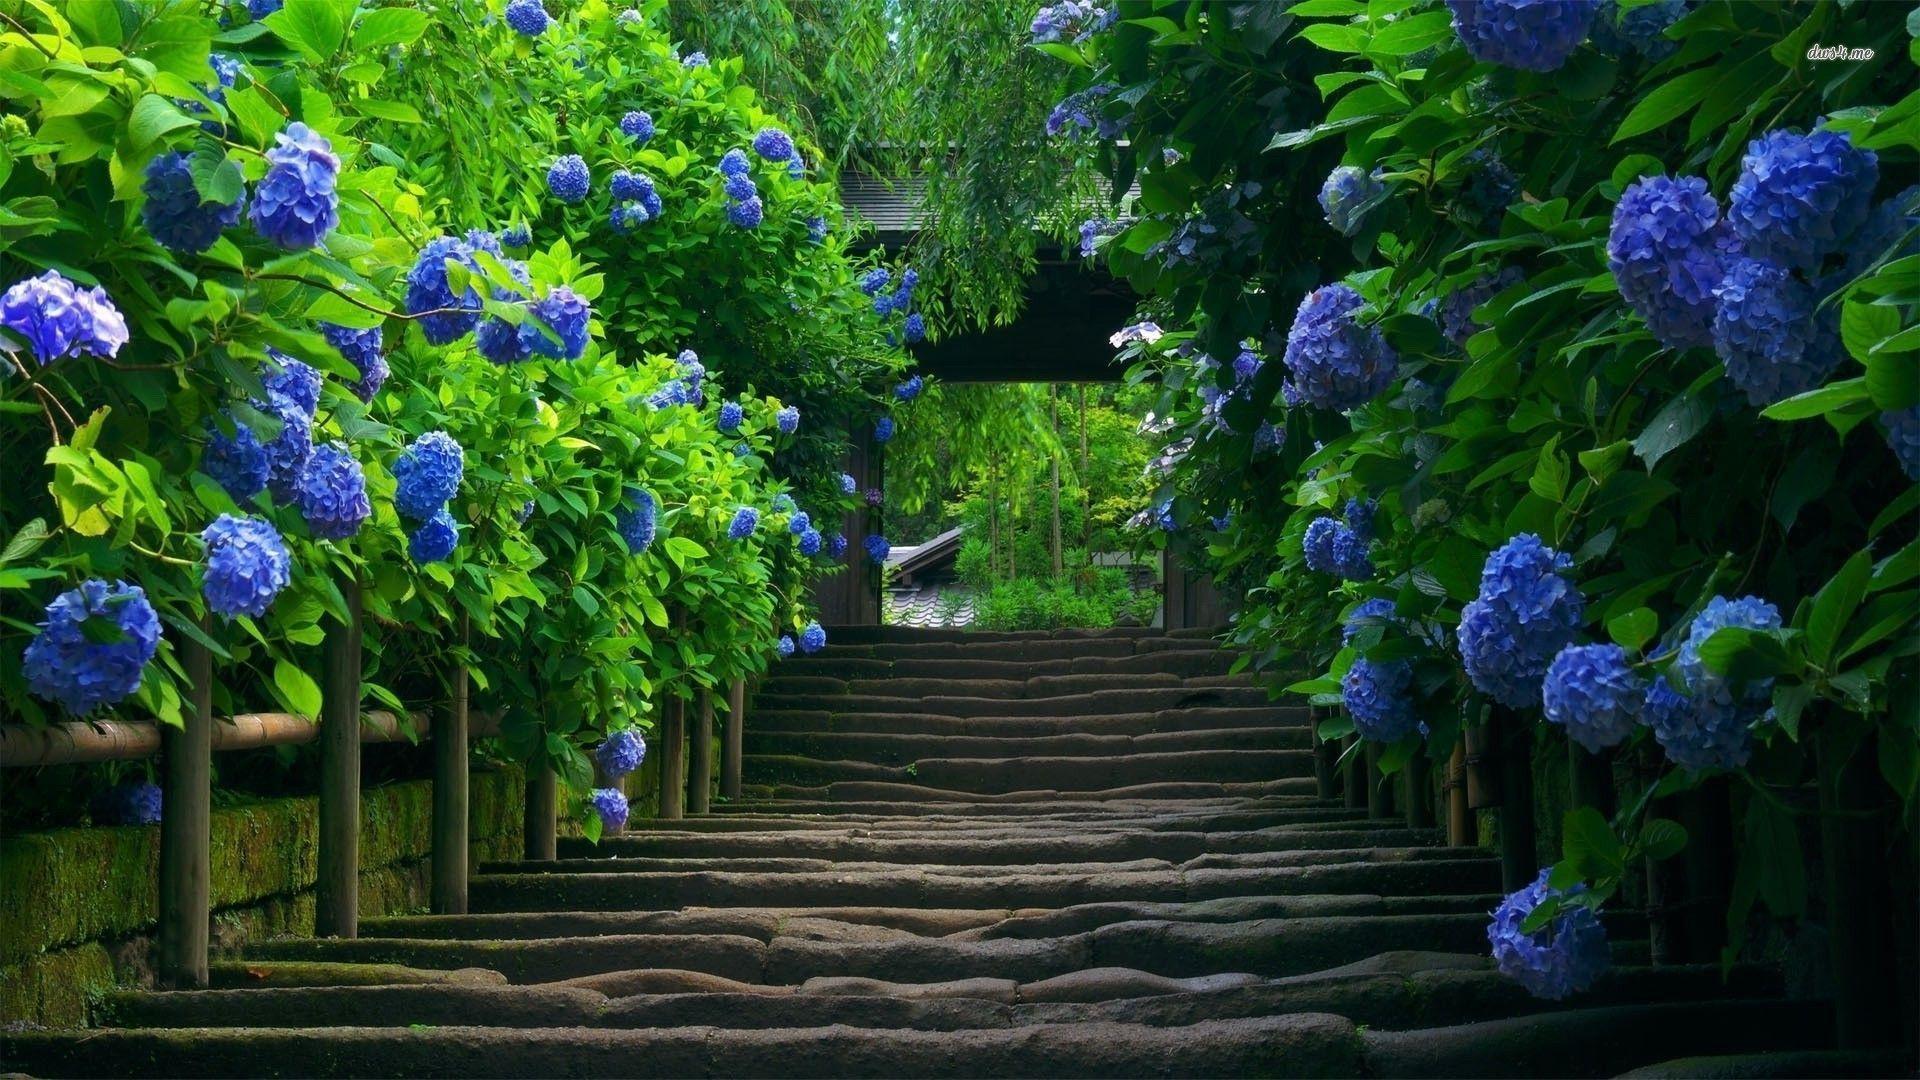 16640 Stairs Under The Blue